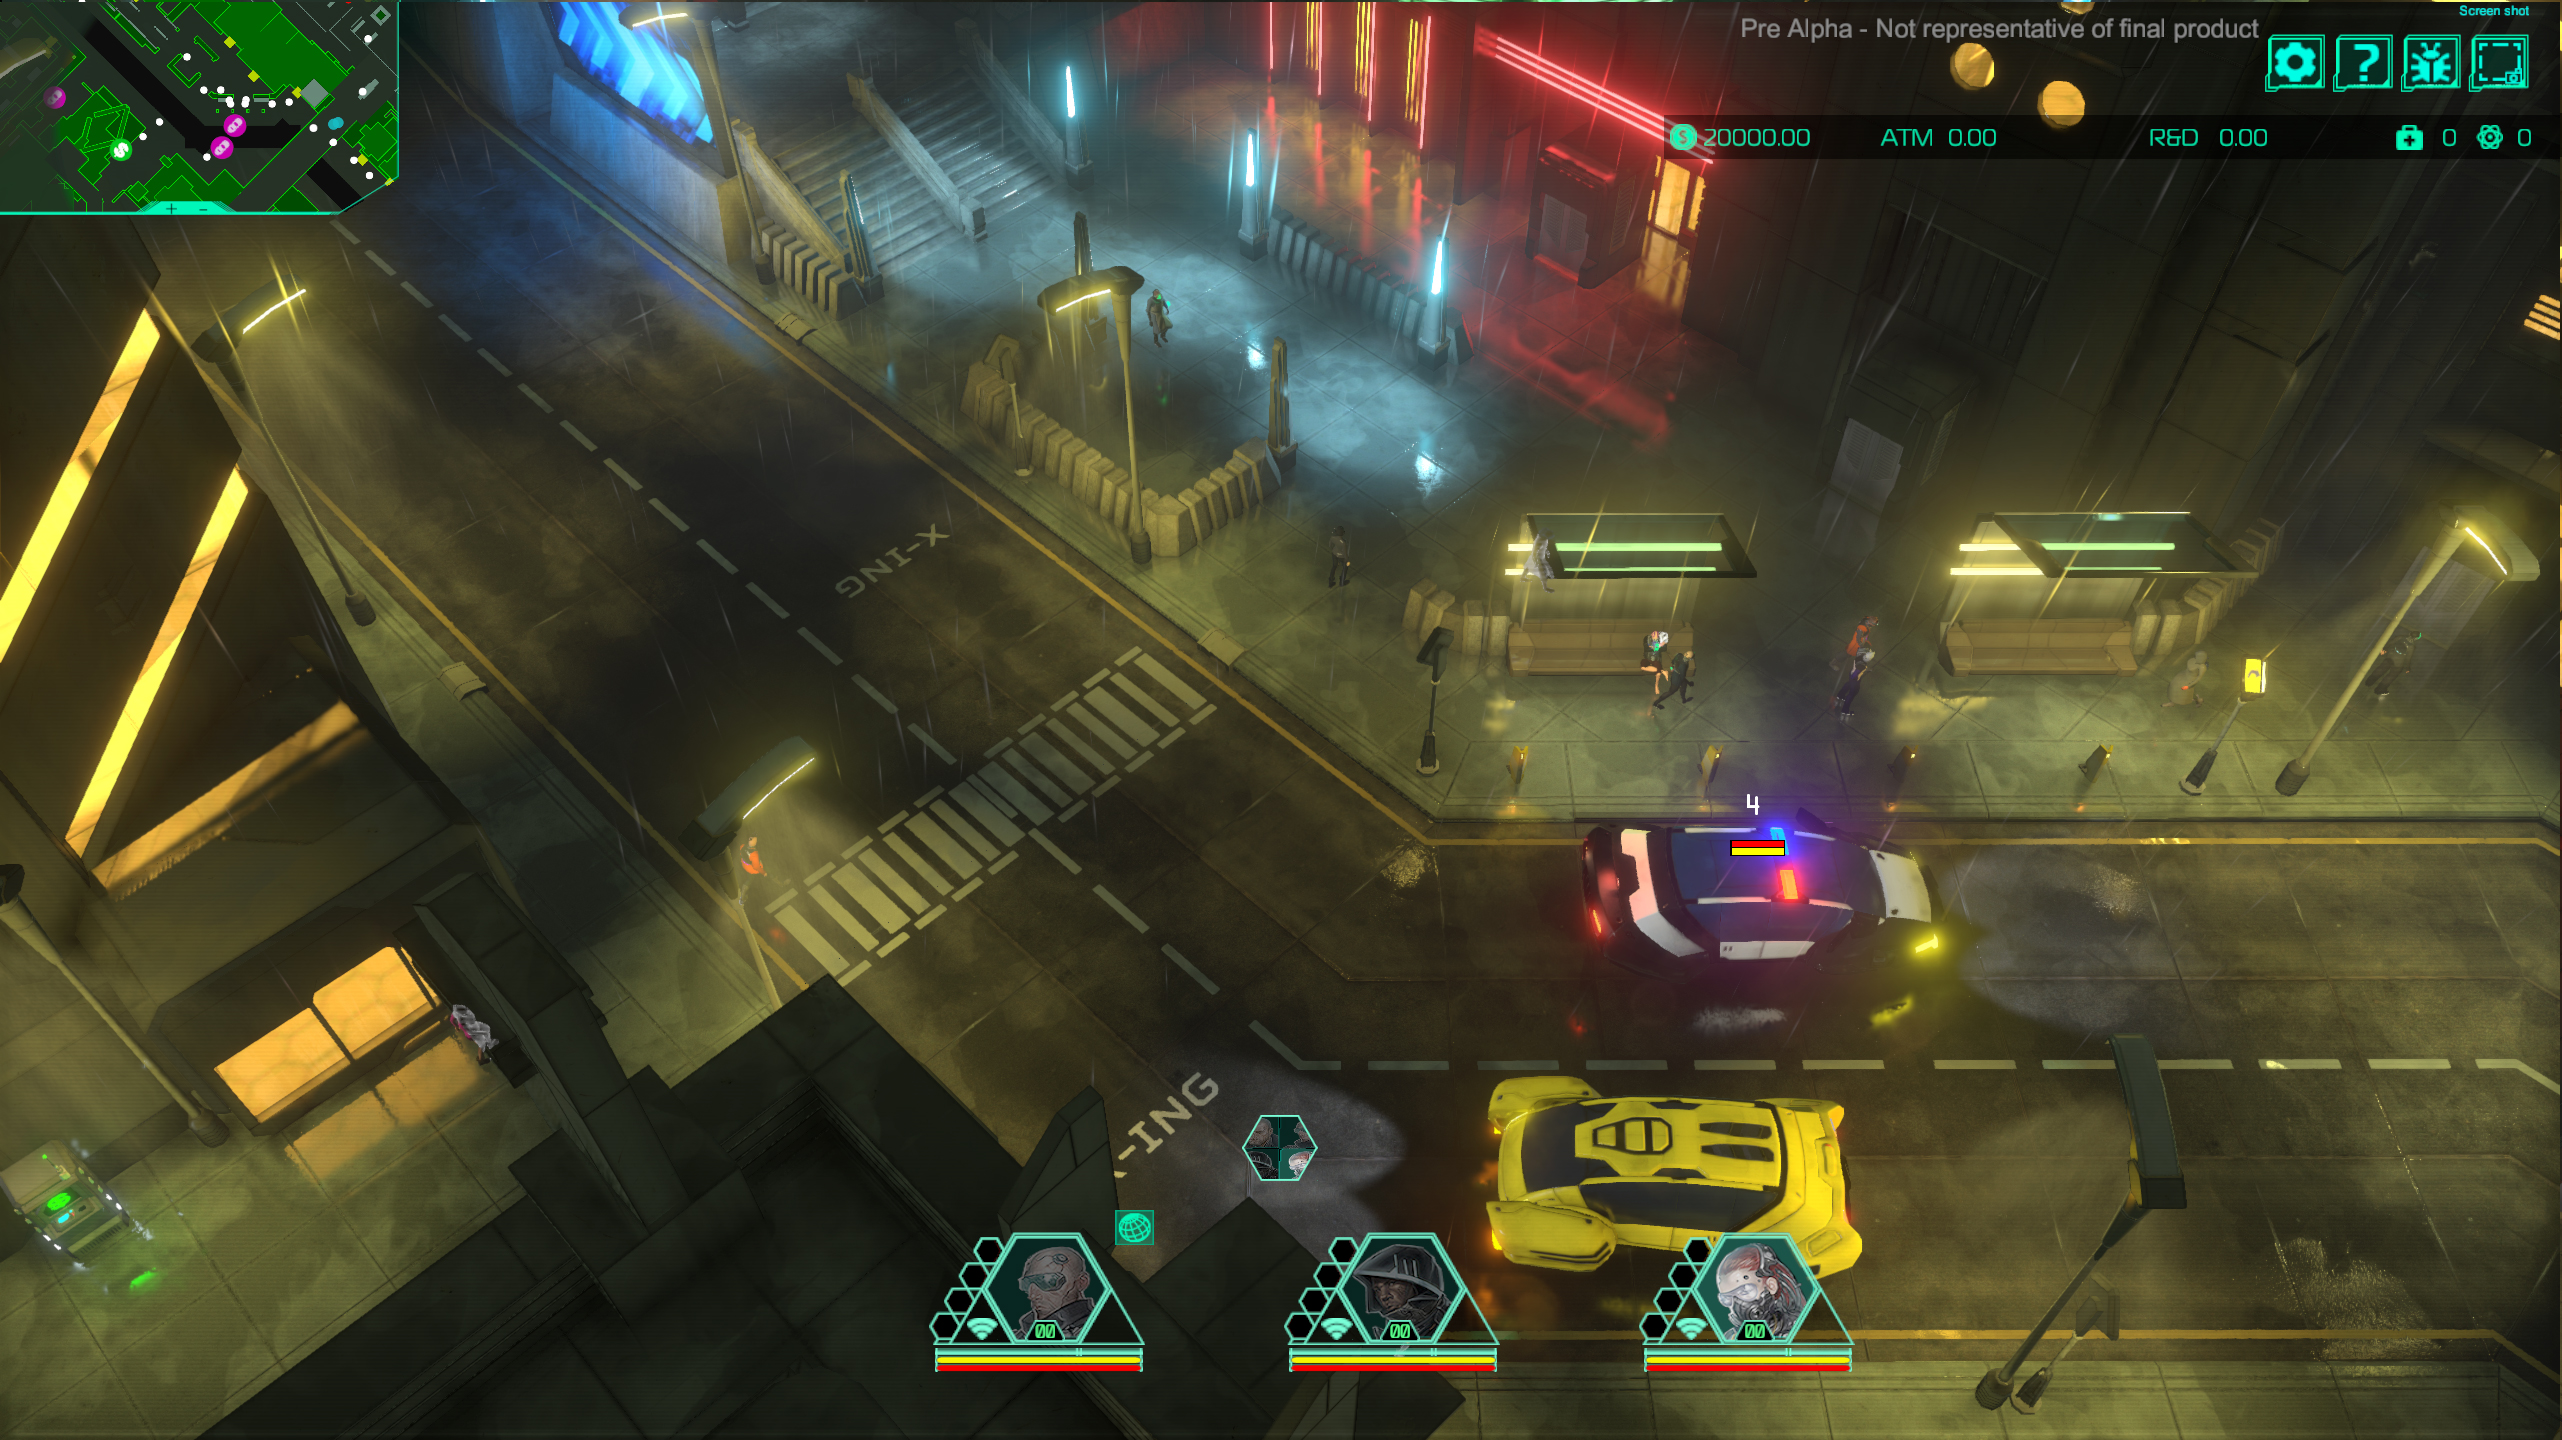 Satellite Reign Review